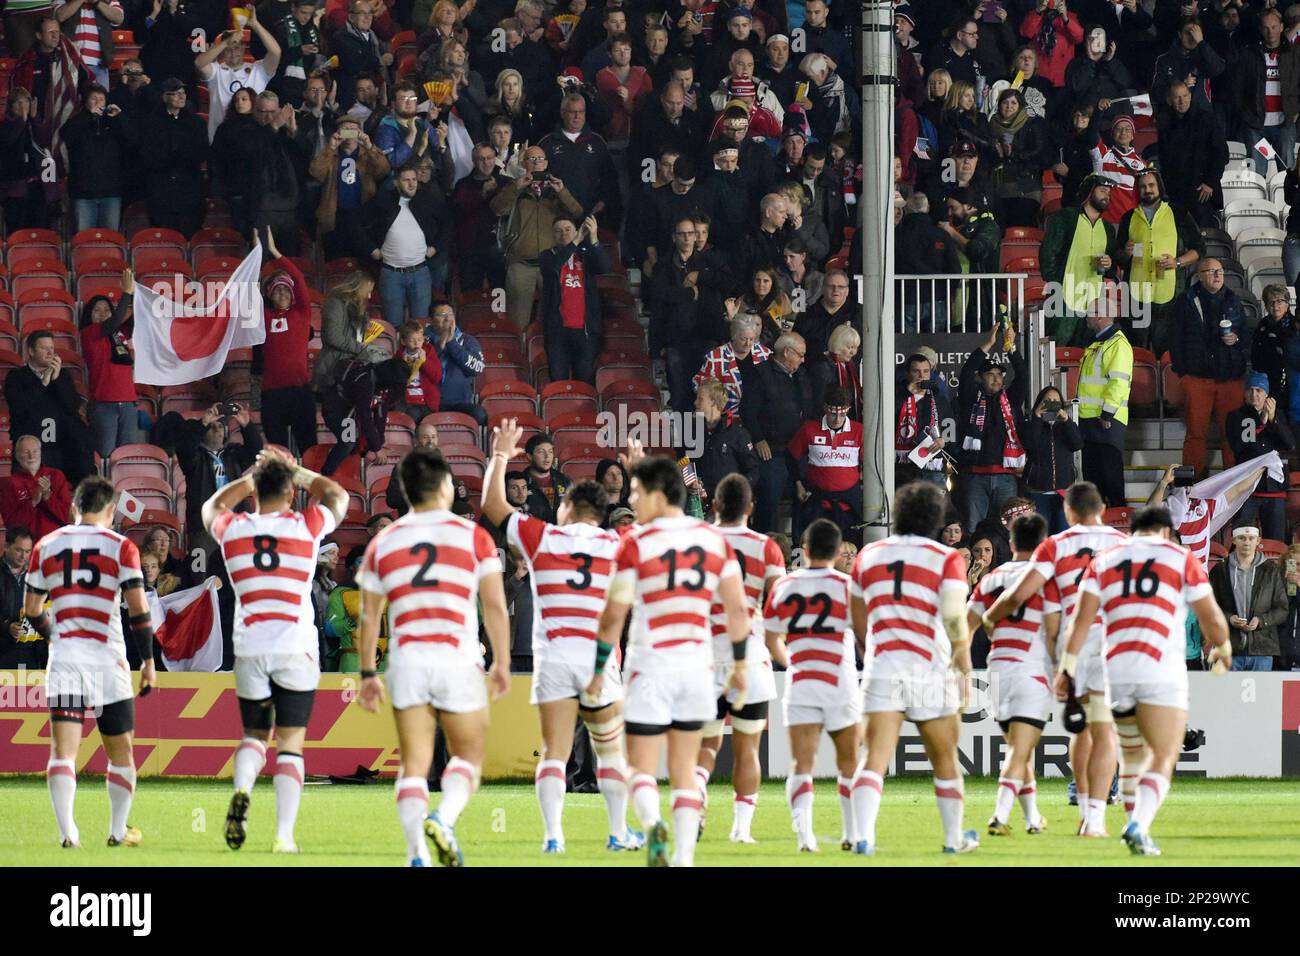 Japanese Cherry Blossoms players celebrate after beating the United States  of the Rugby World Cup Pool B match at Kingsholm Stadium in Gloucester,  England on Oct. 11, 2015. The Cherry Blossoms defeated